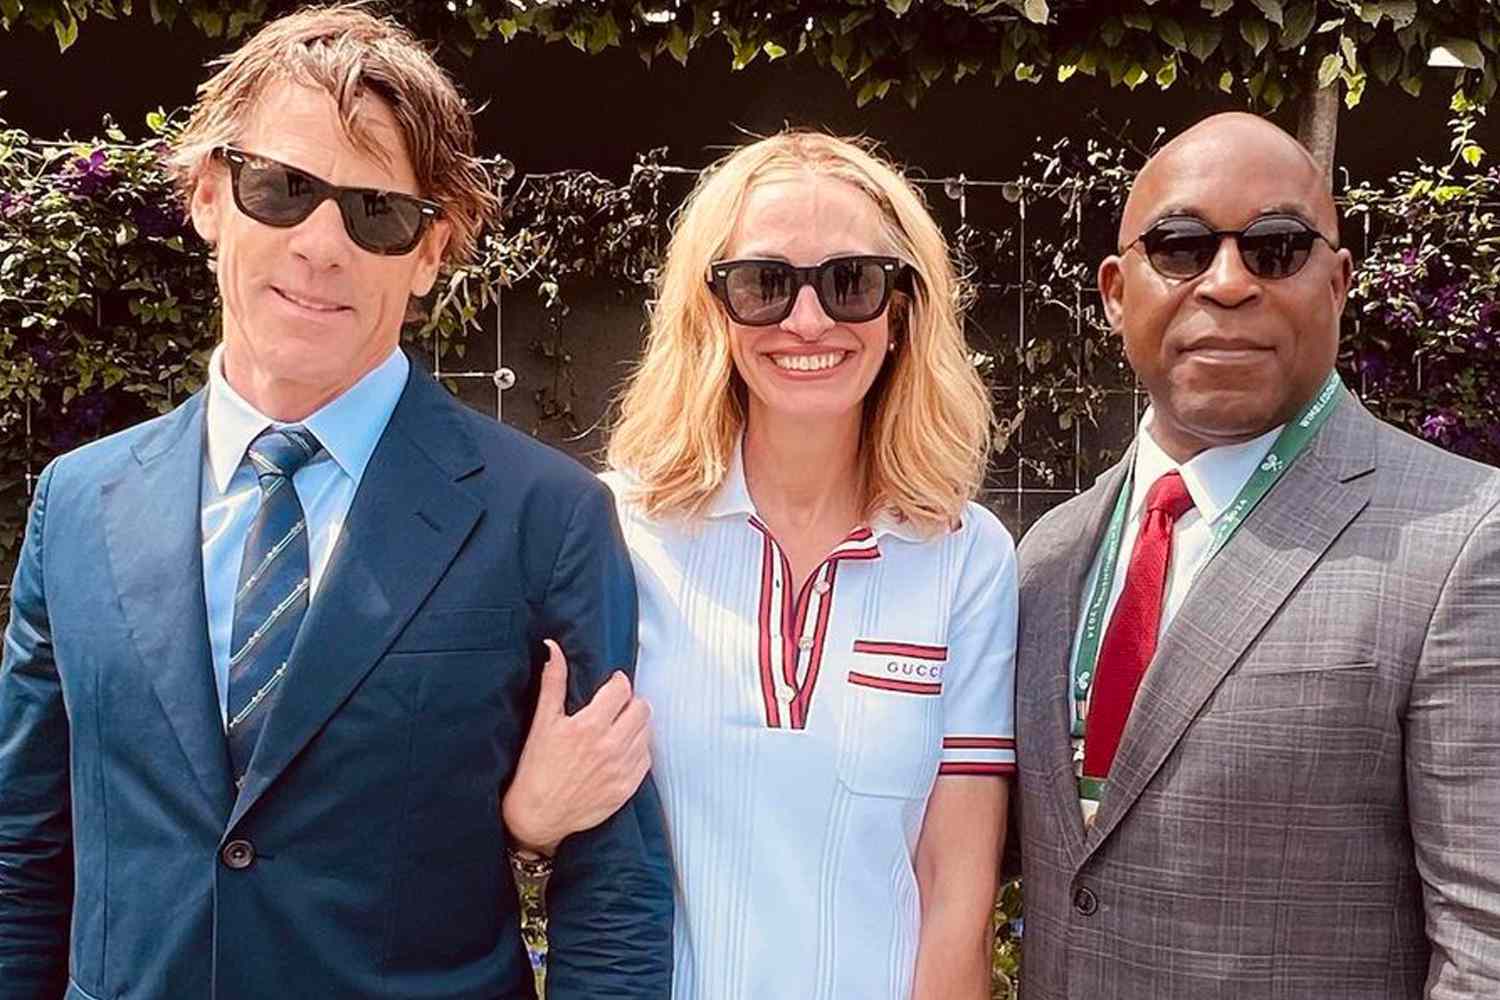 Julia Roberts Steps Out in Style with Husband Danny Moder for Wimbledon: 'An Incredible Day'